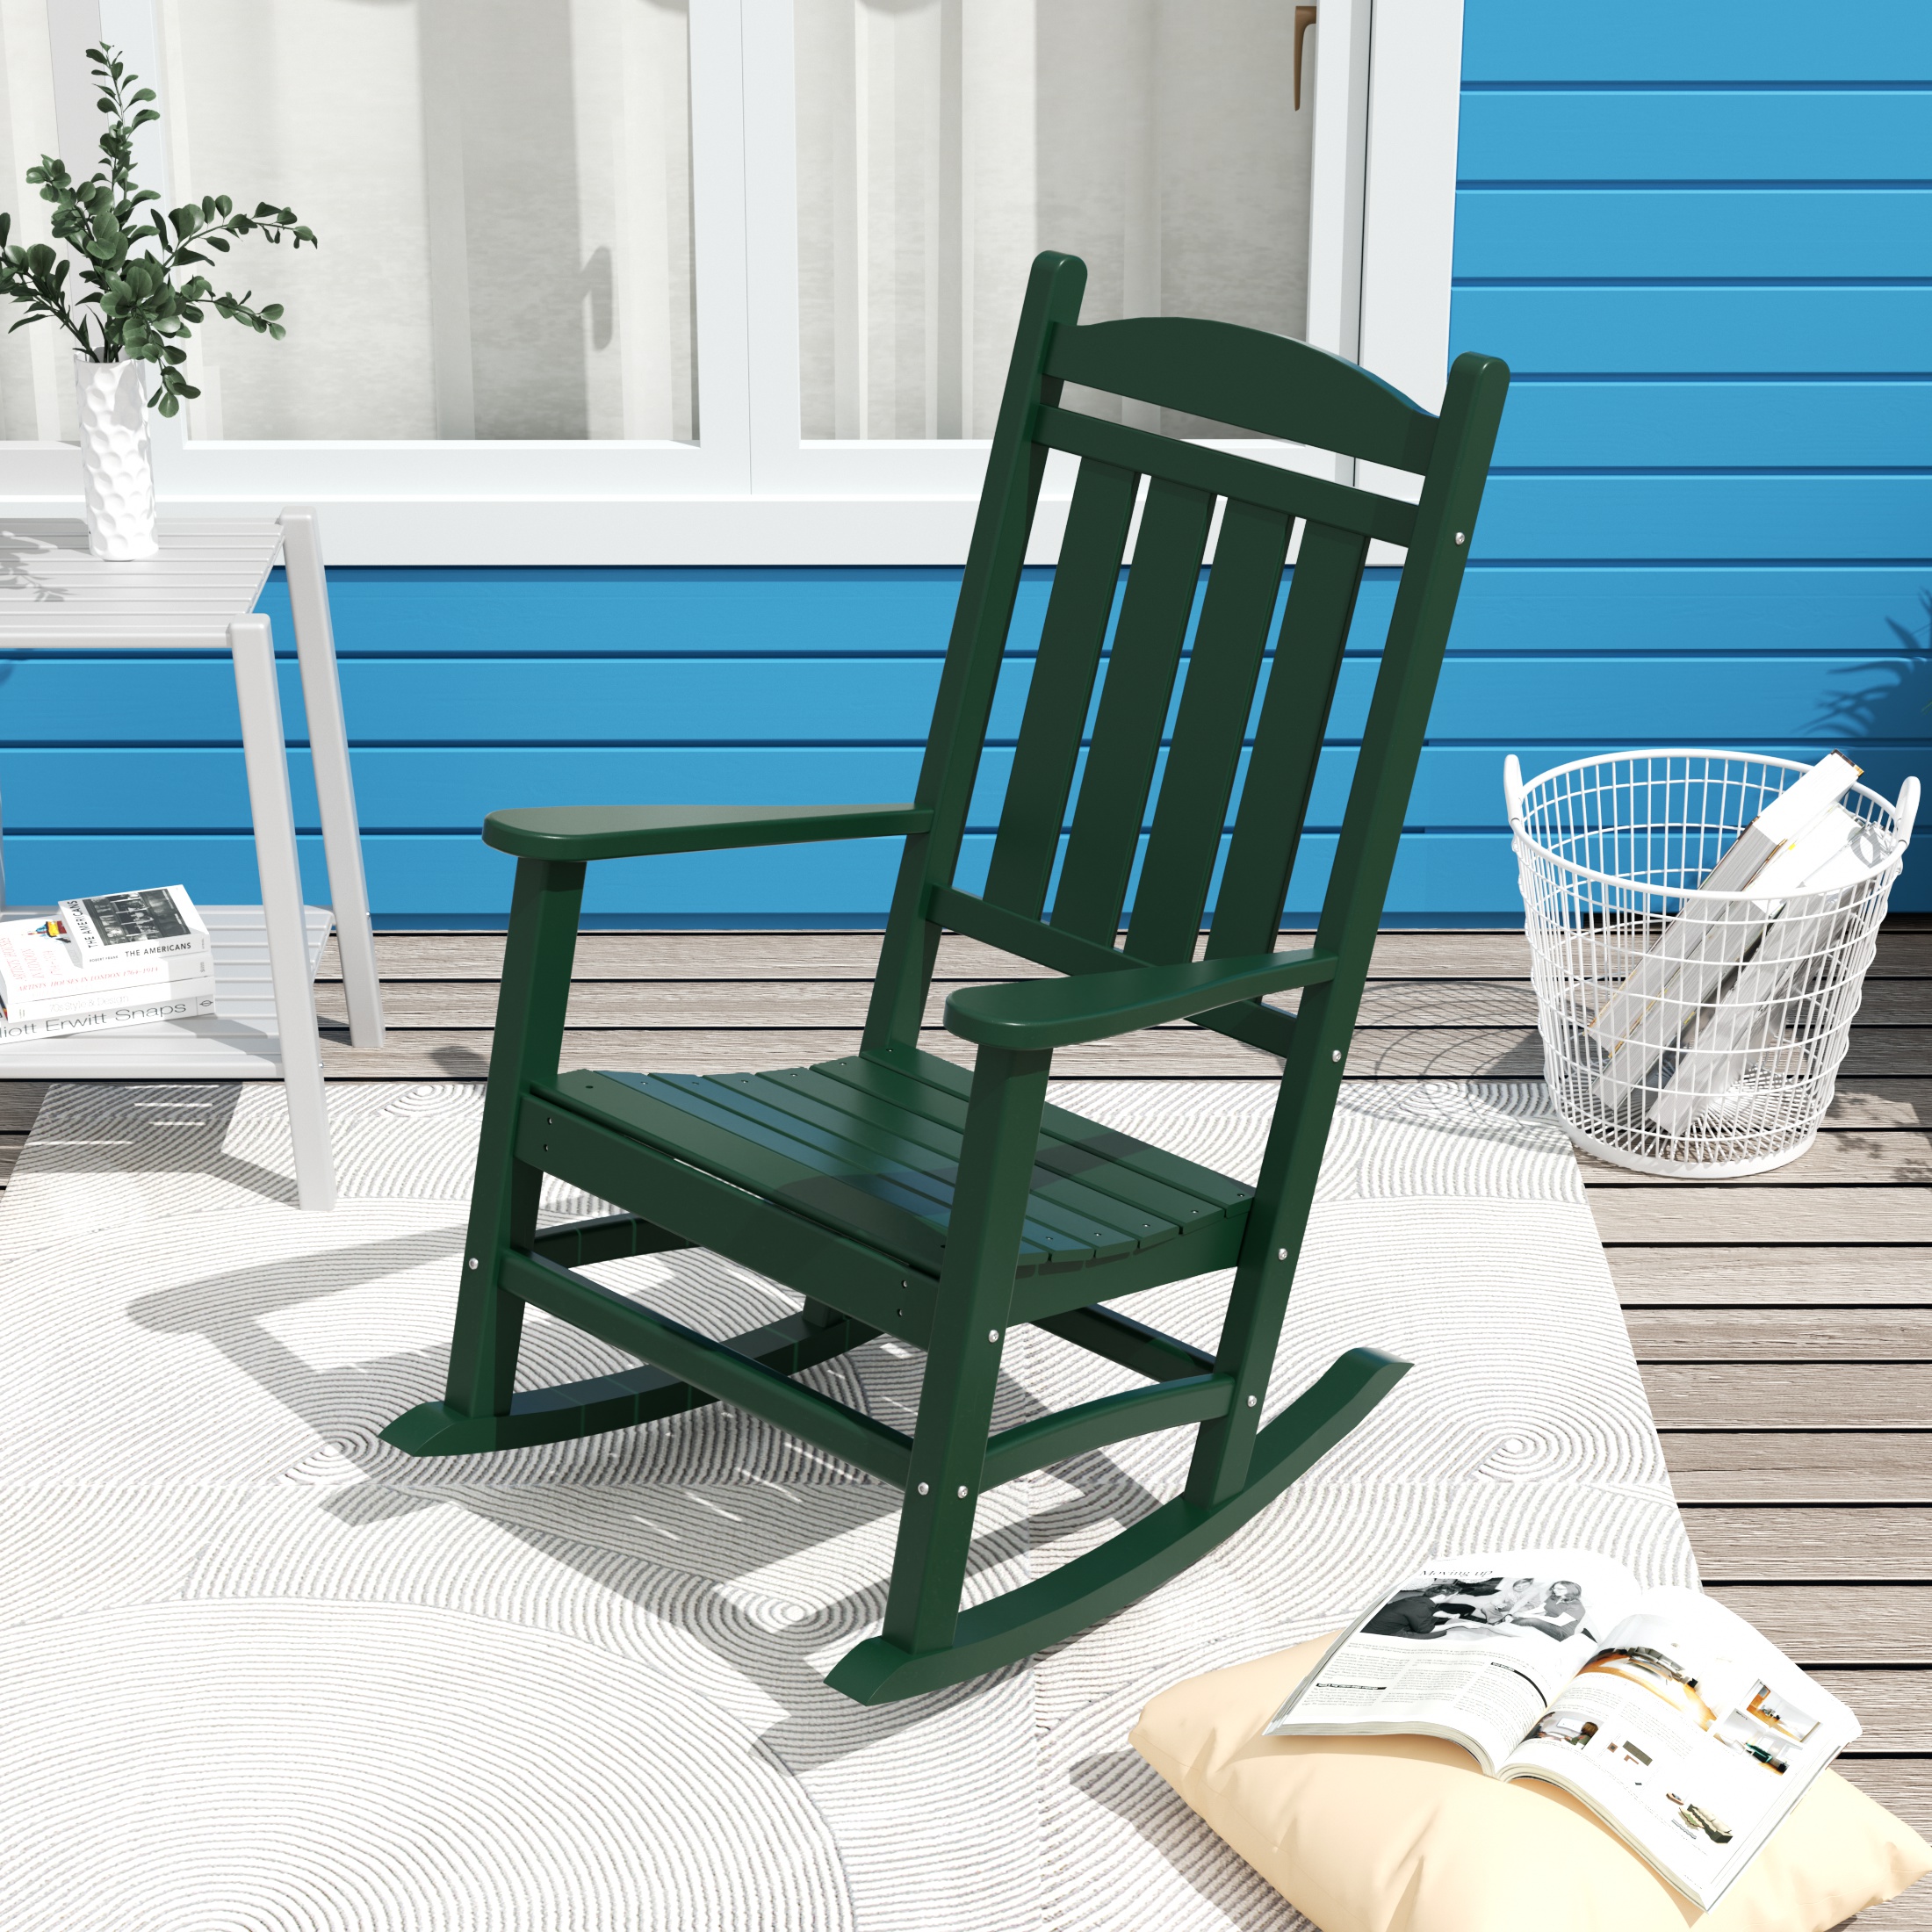 Costaelm Paradise Classic Plastic Porch Rocking Chair, Dark Green - image 2 of 9